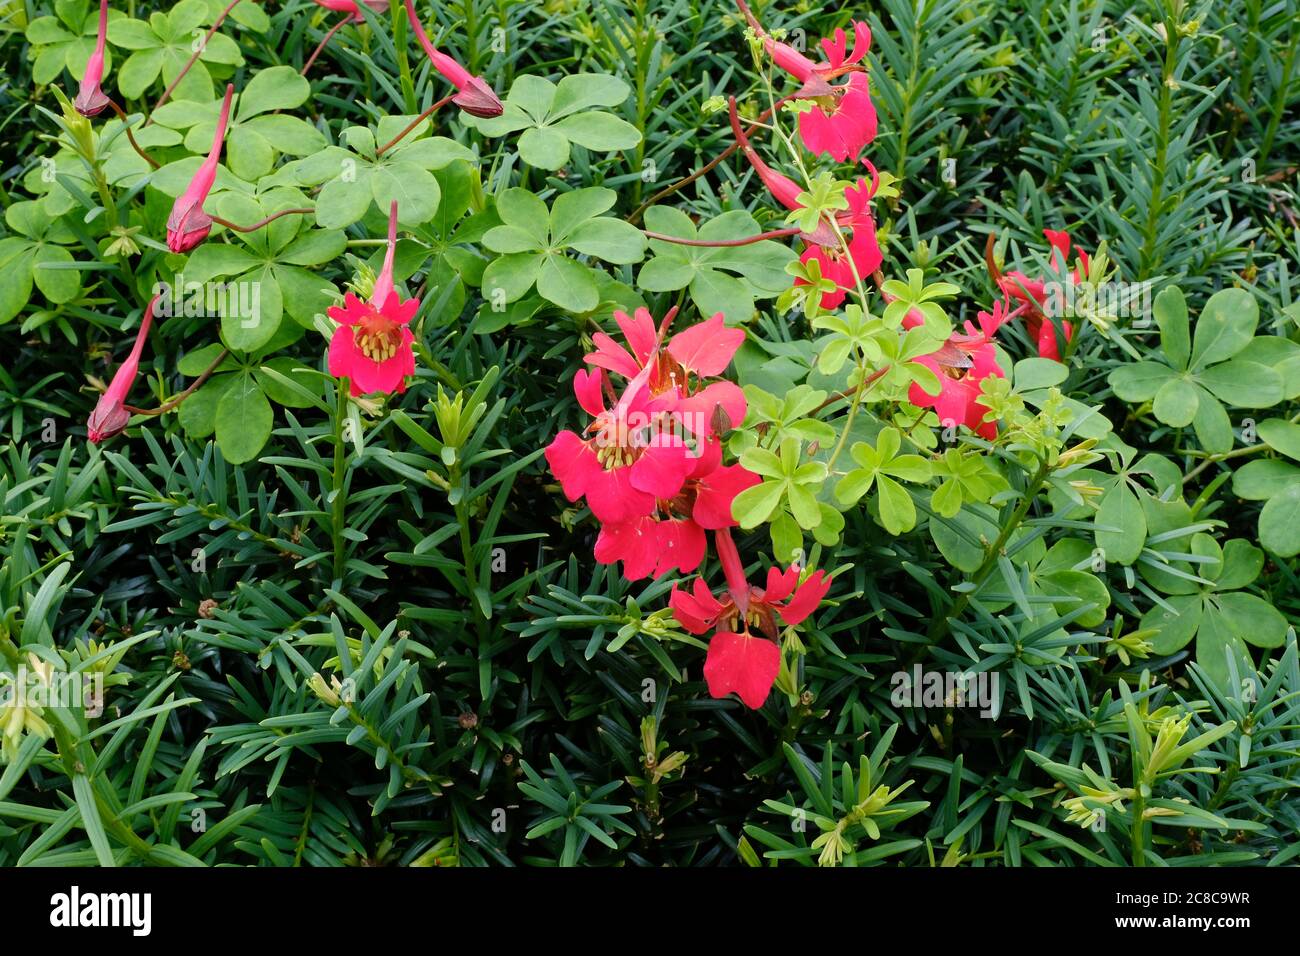 Scottish Flame Flower, Tropaeolum speciosum. Delightful, Scarlet Flower, Turquoise-Blue, Berries, Divided Leaves, Cumbria, England, Northern Climate. Stock Photo